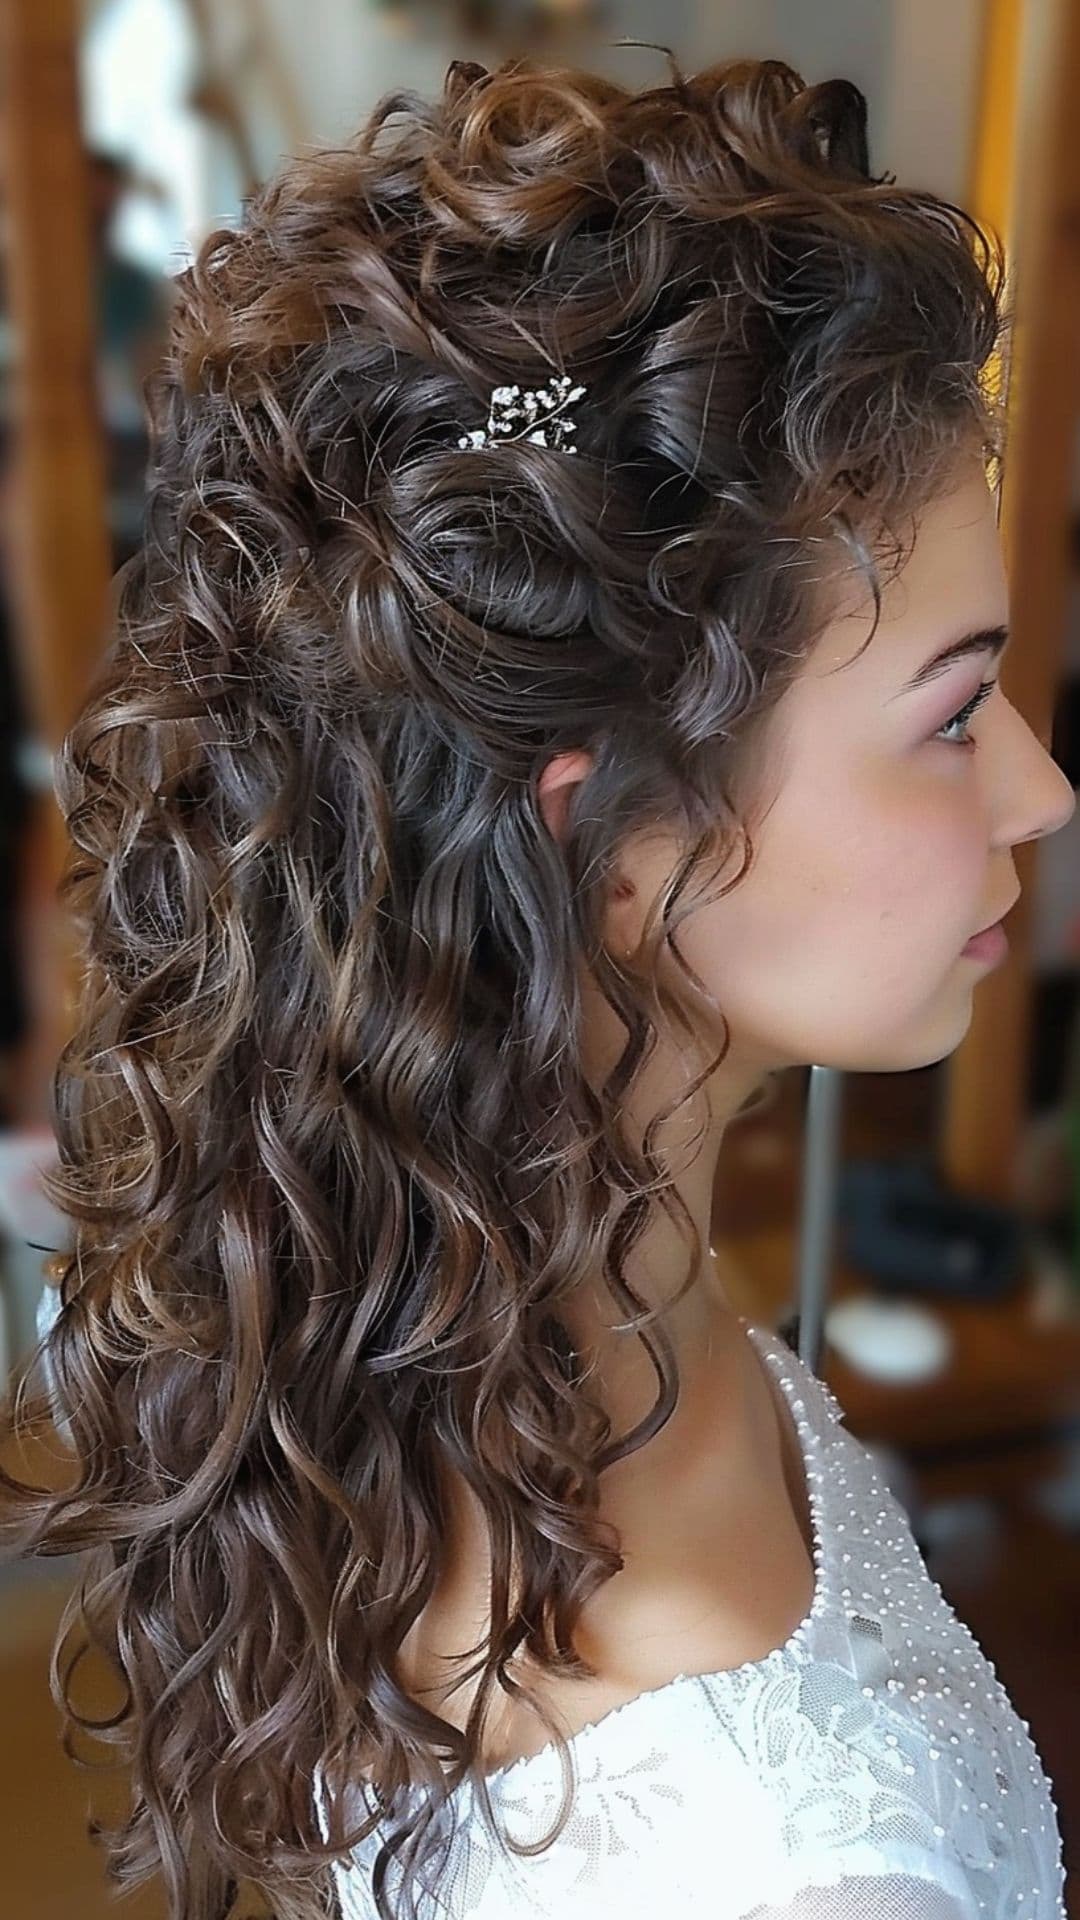 A woman modelling a curly half up half down hairstyle.